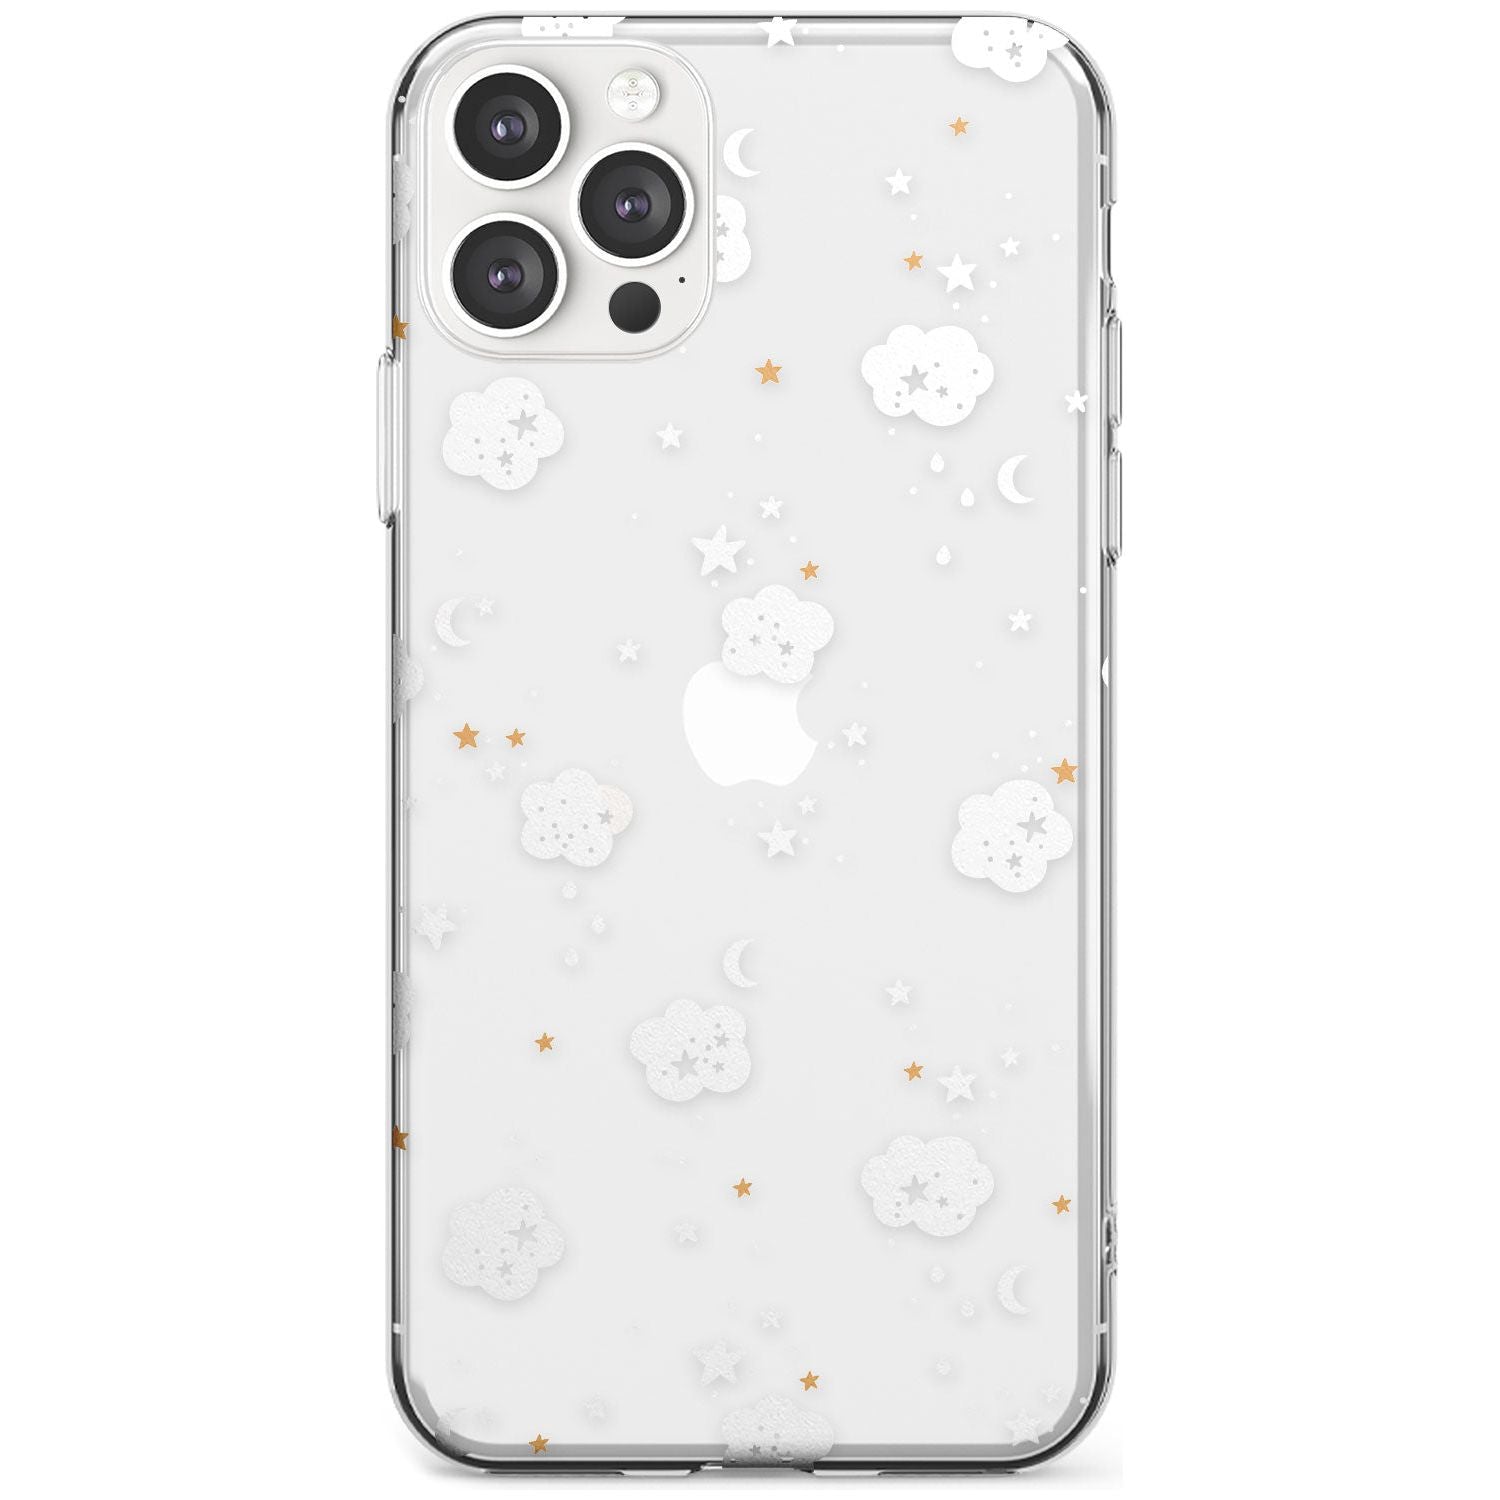 Stars & Clouds Black Impact Phone Case for iPhone 11 Pro Max